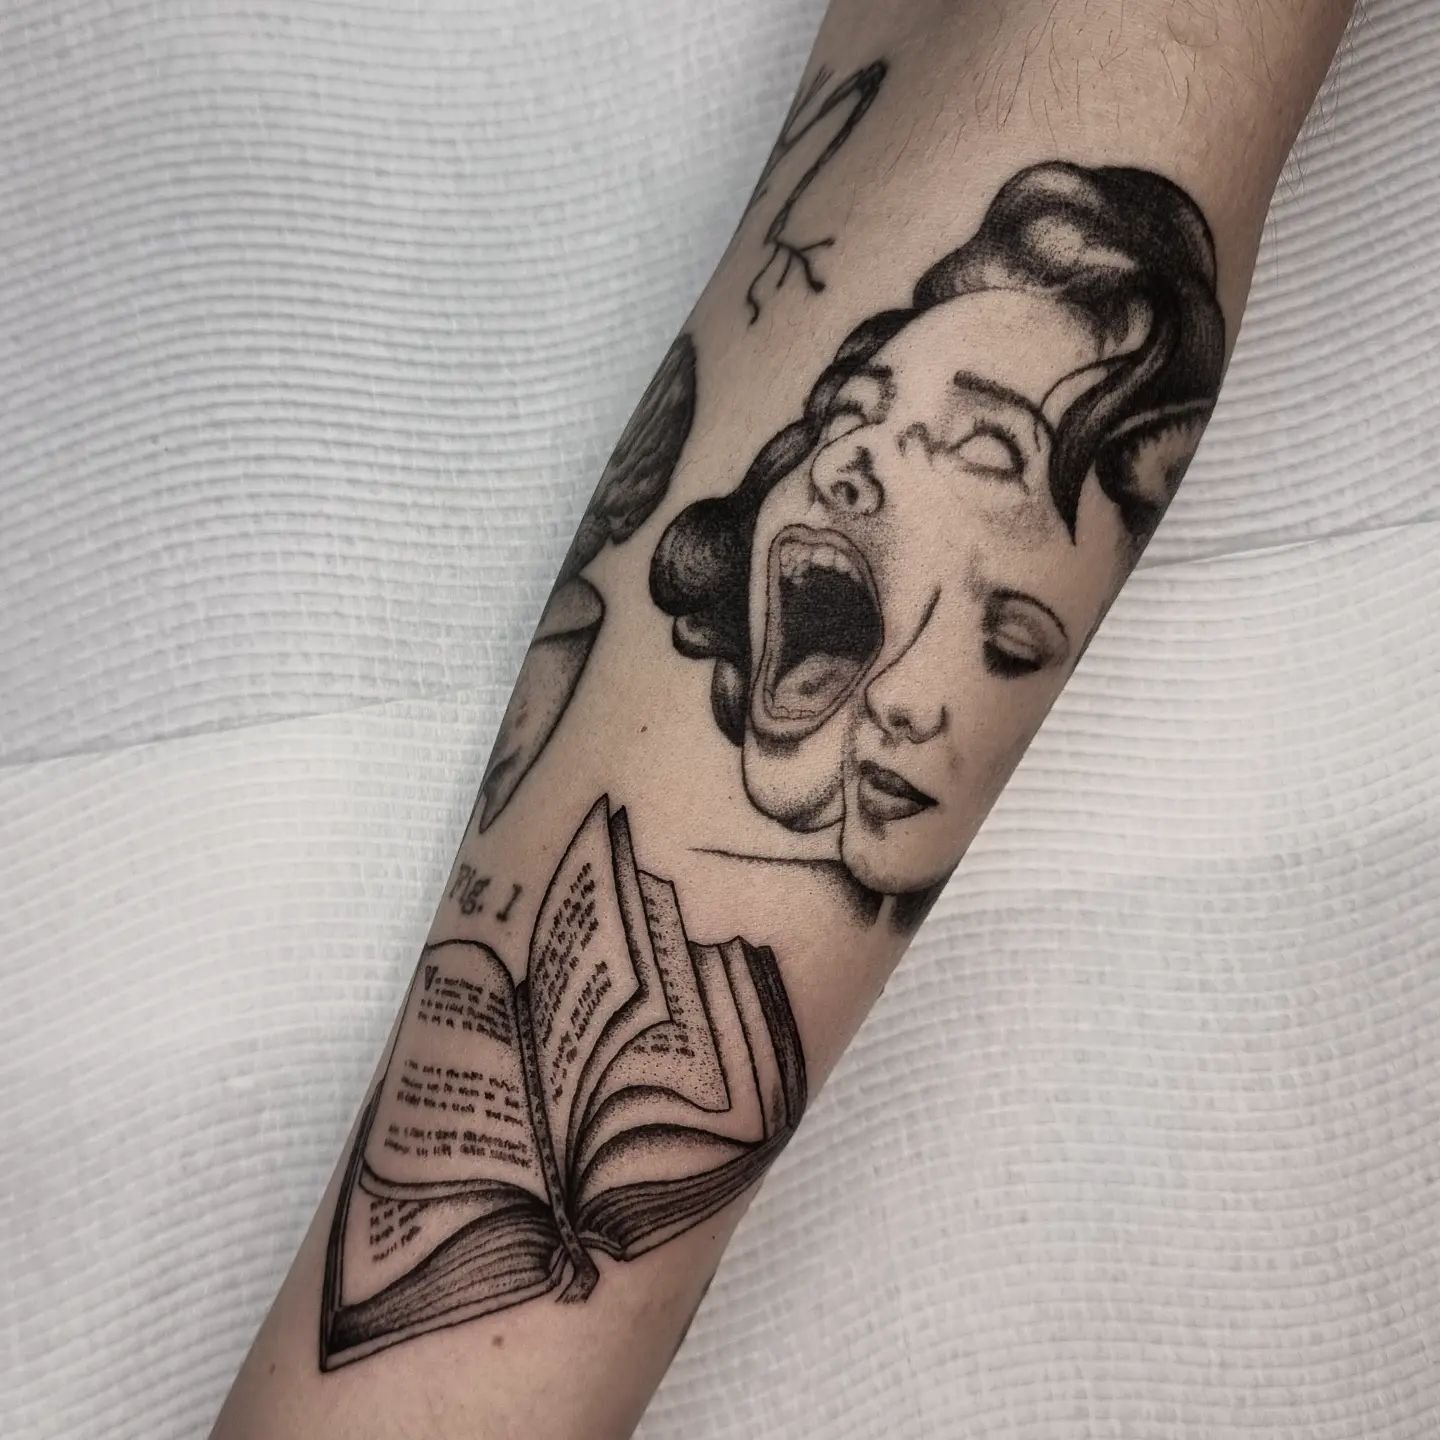 A cute book under some healed beauty's for amazing Rochelle! Plus some eyes to fill some gaps on the forearm. Thank you as always Rochelle! 🩷
.
.
.
.
.
#scientificillustration #scientifictattoo #booktattoo #healedtattoo #realismtattoo #realistictatt